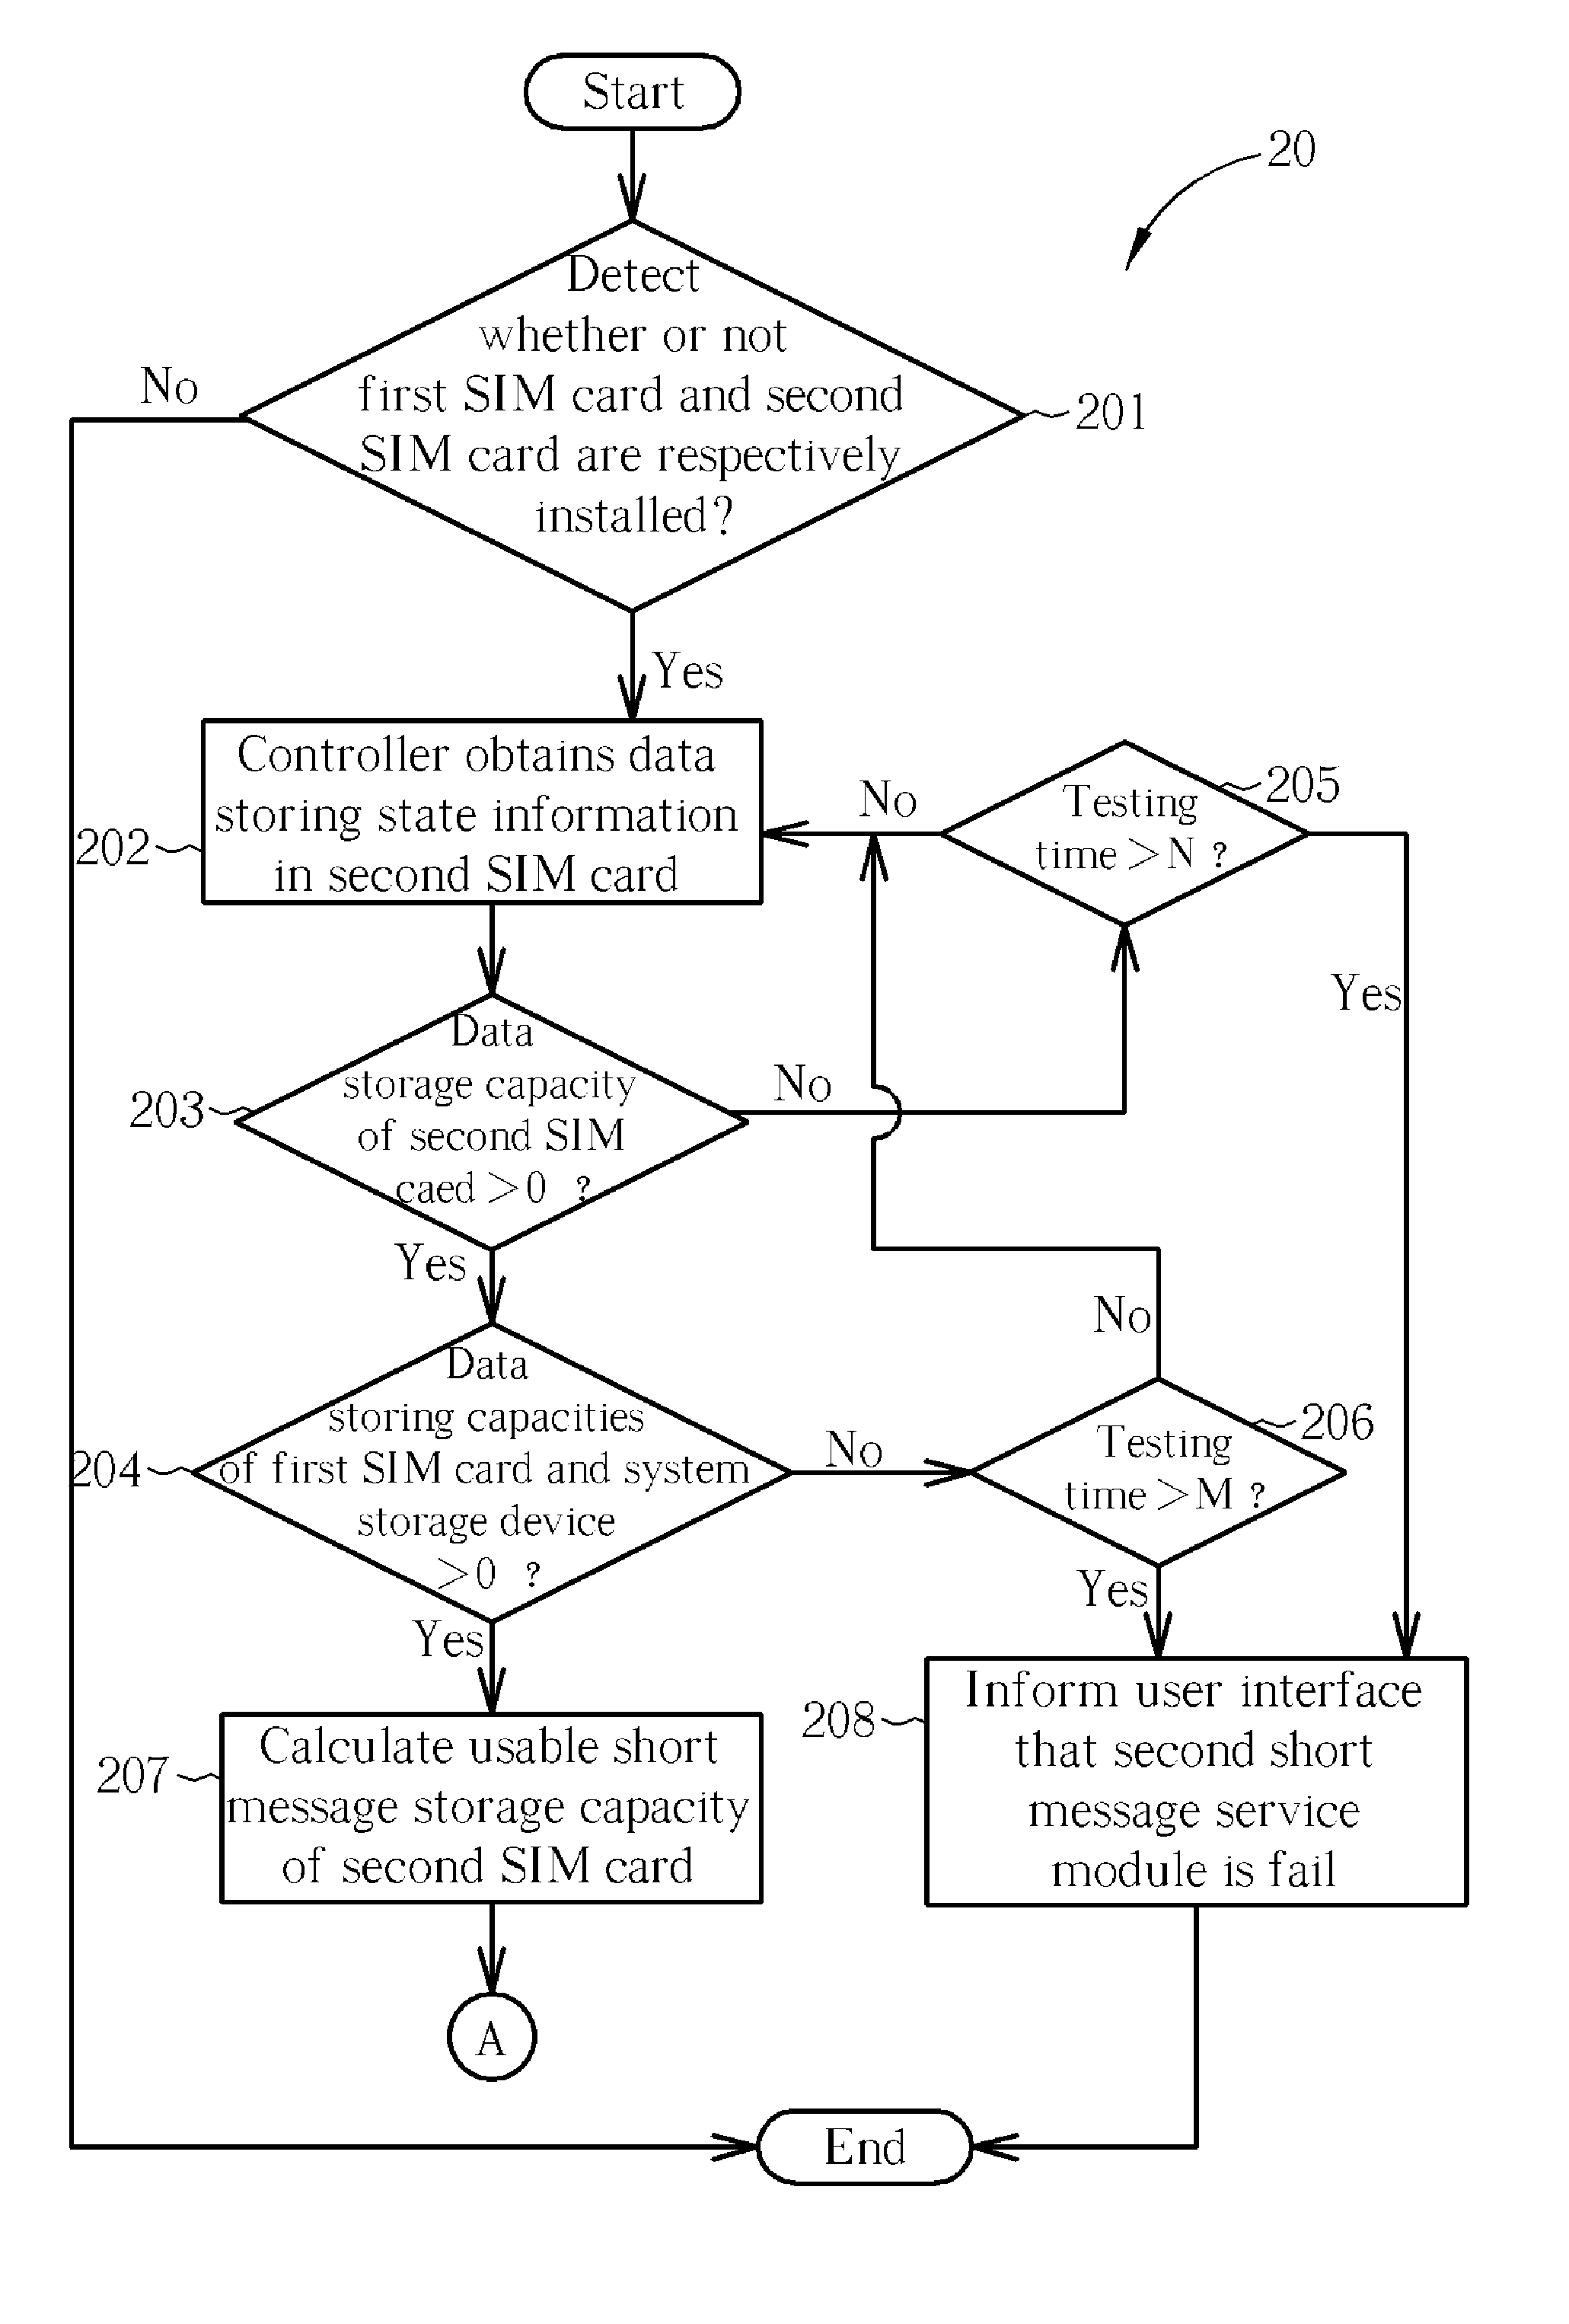 Communication apparatus capable of accessing multiple telecommunication networks of the same telecommunication standard